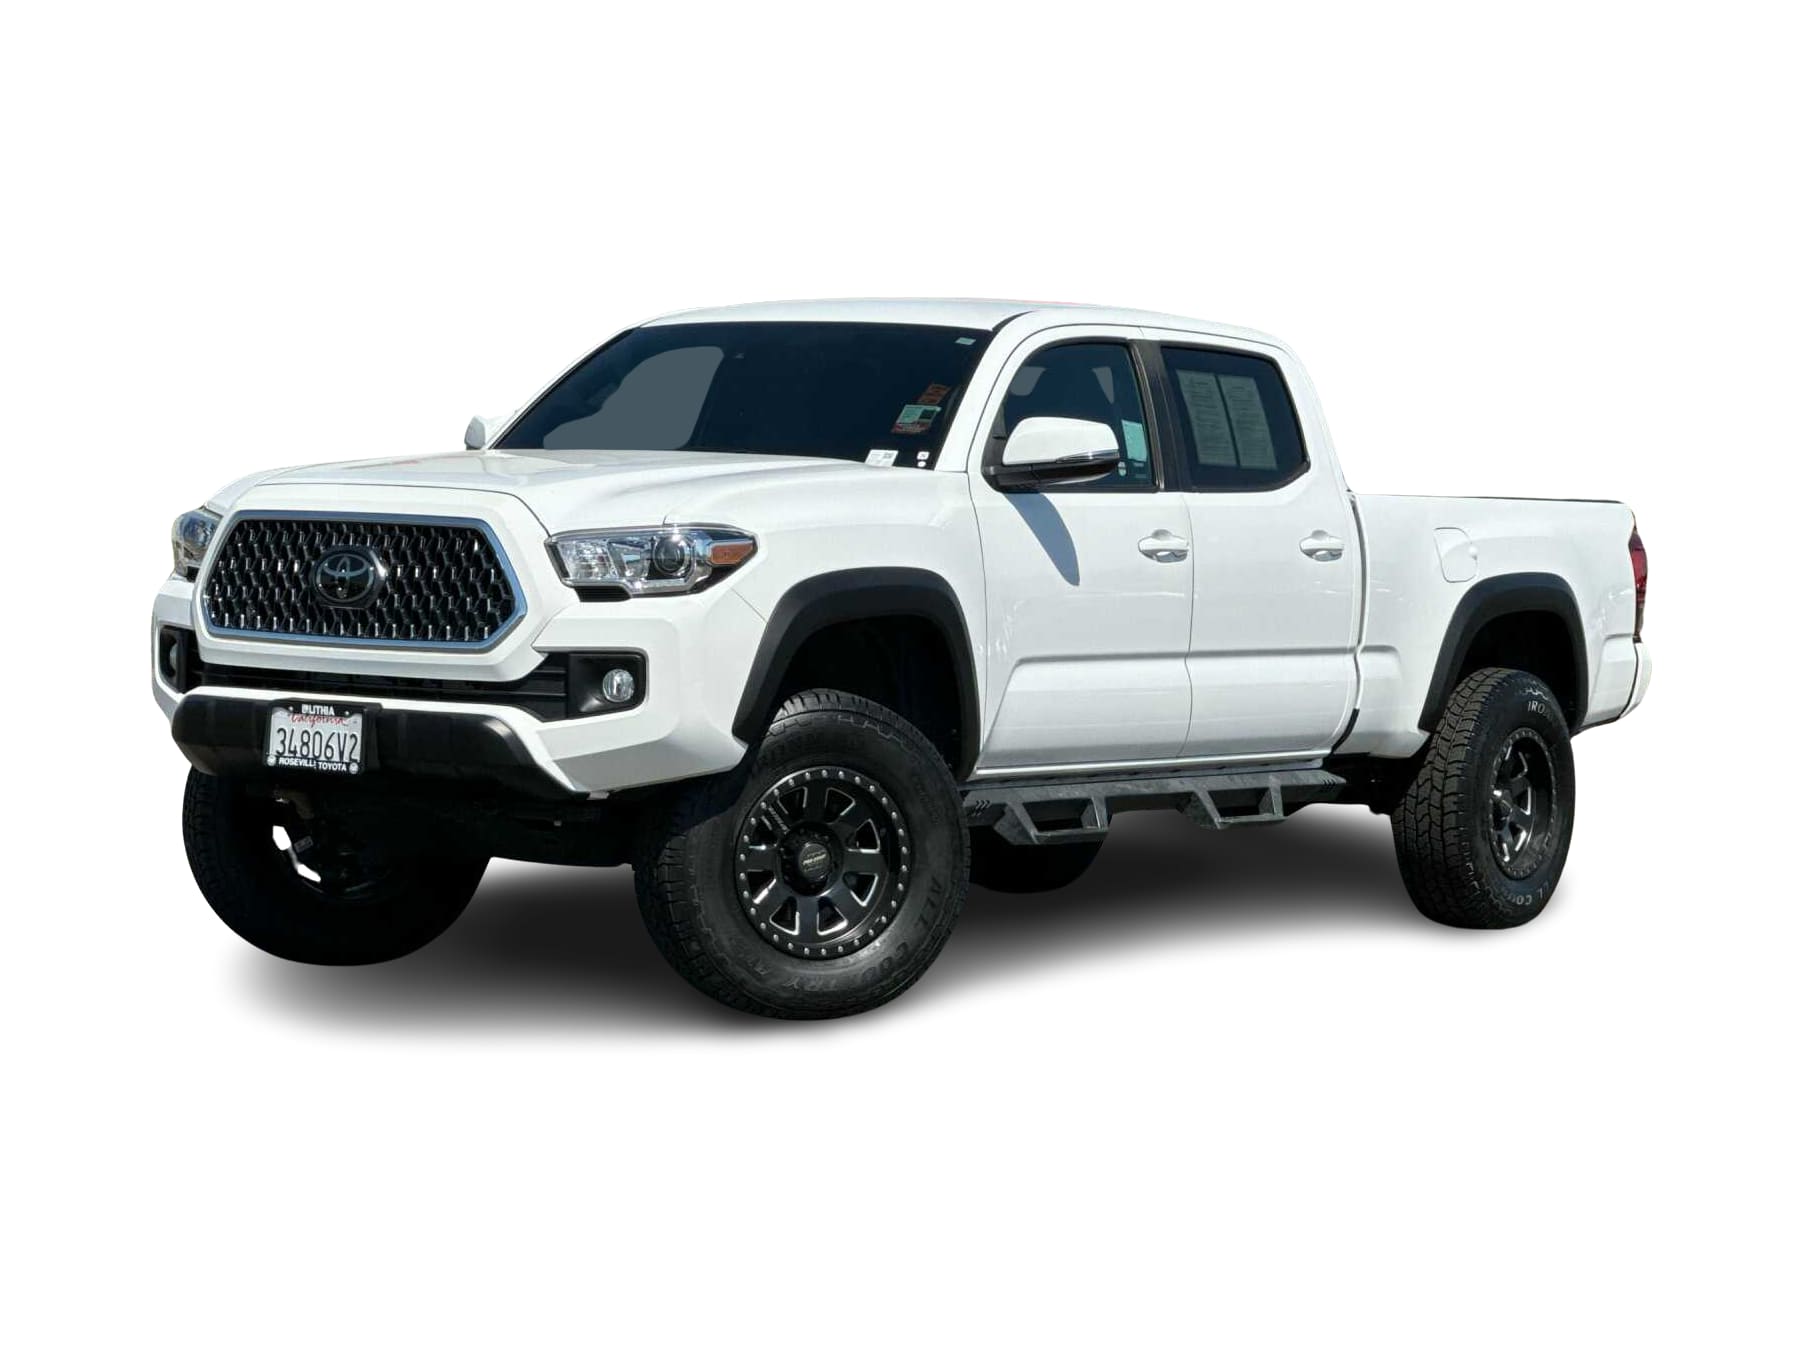 2019 Toyota Tacoma TRD Off-Road -
                Roseville, CA